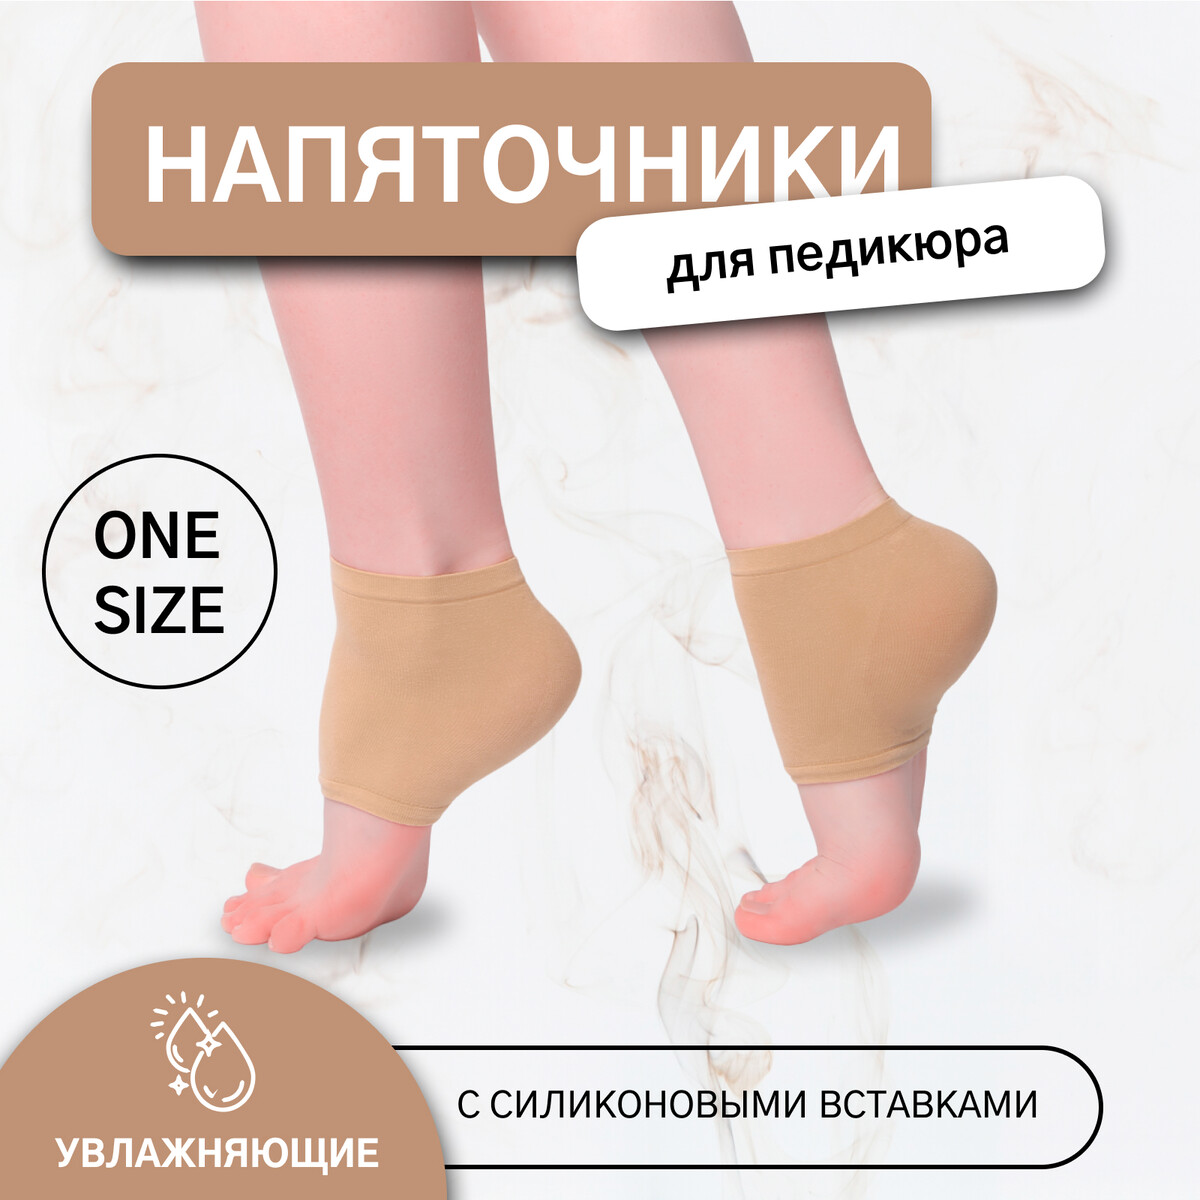   , ,   , one size,  